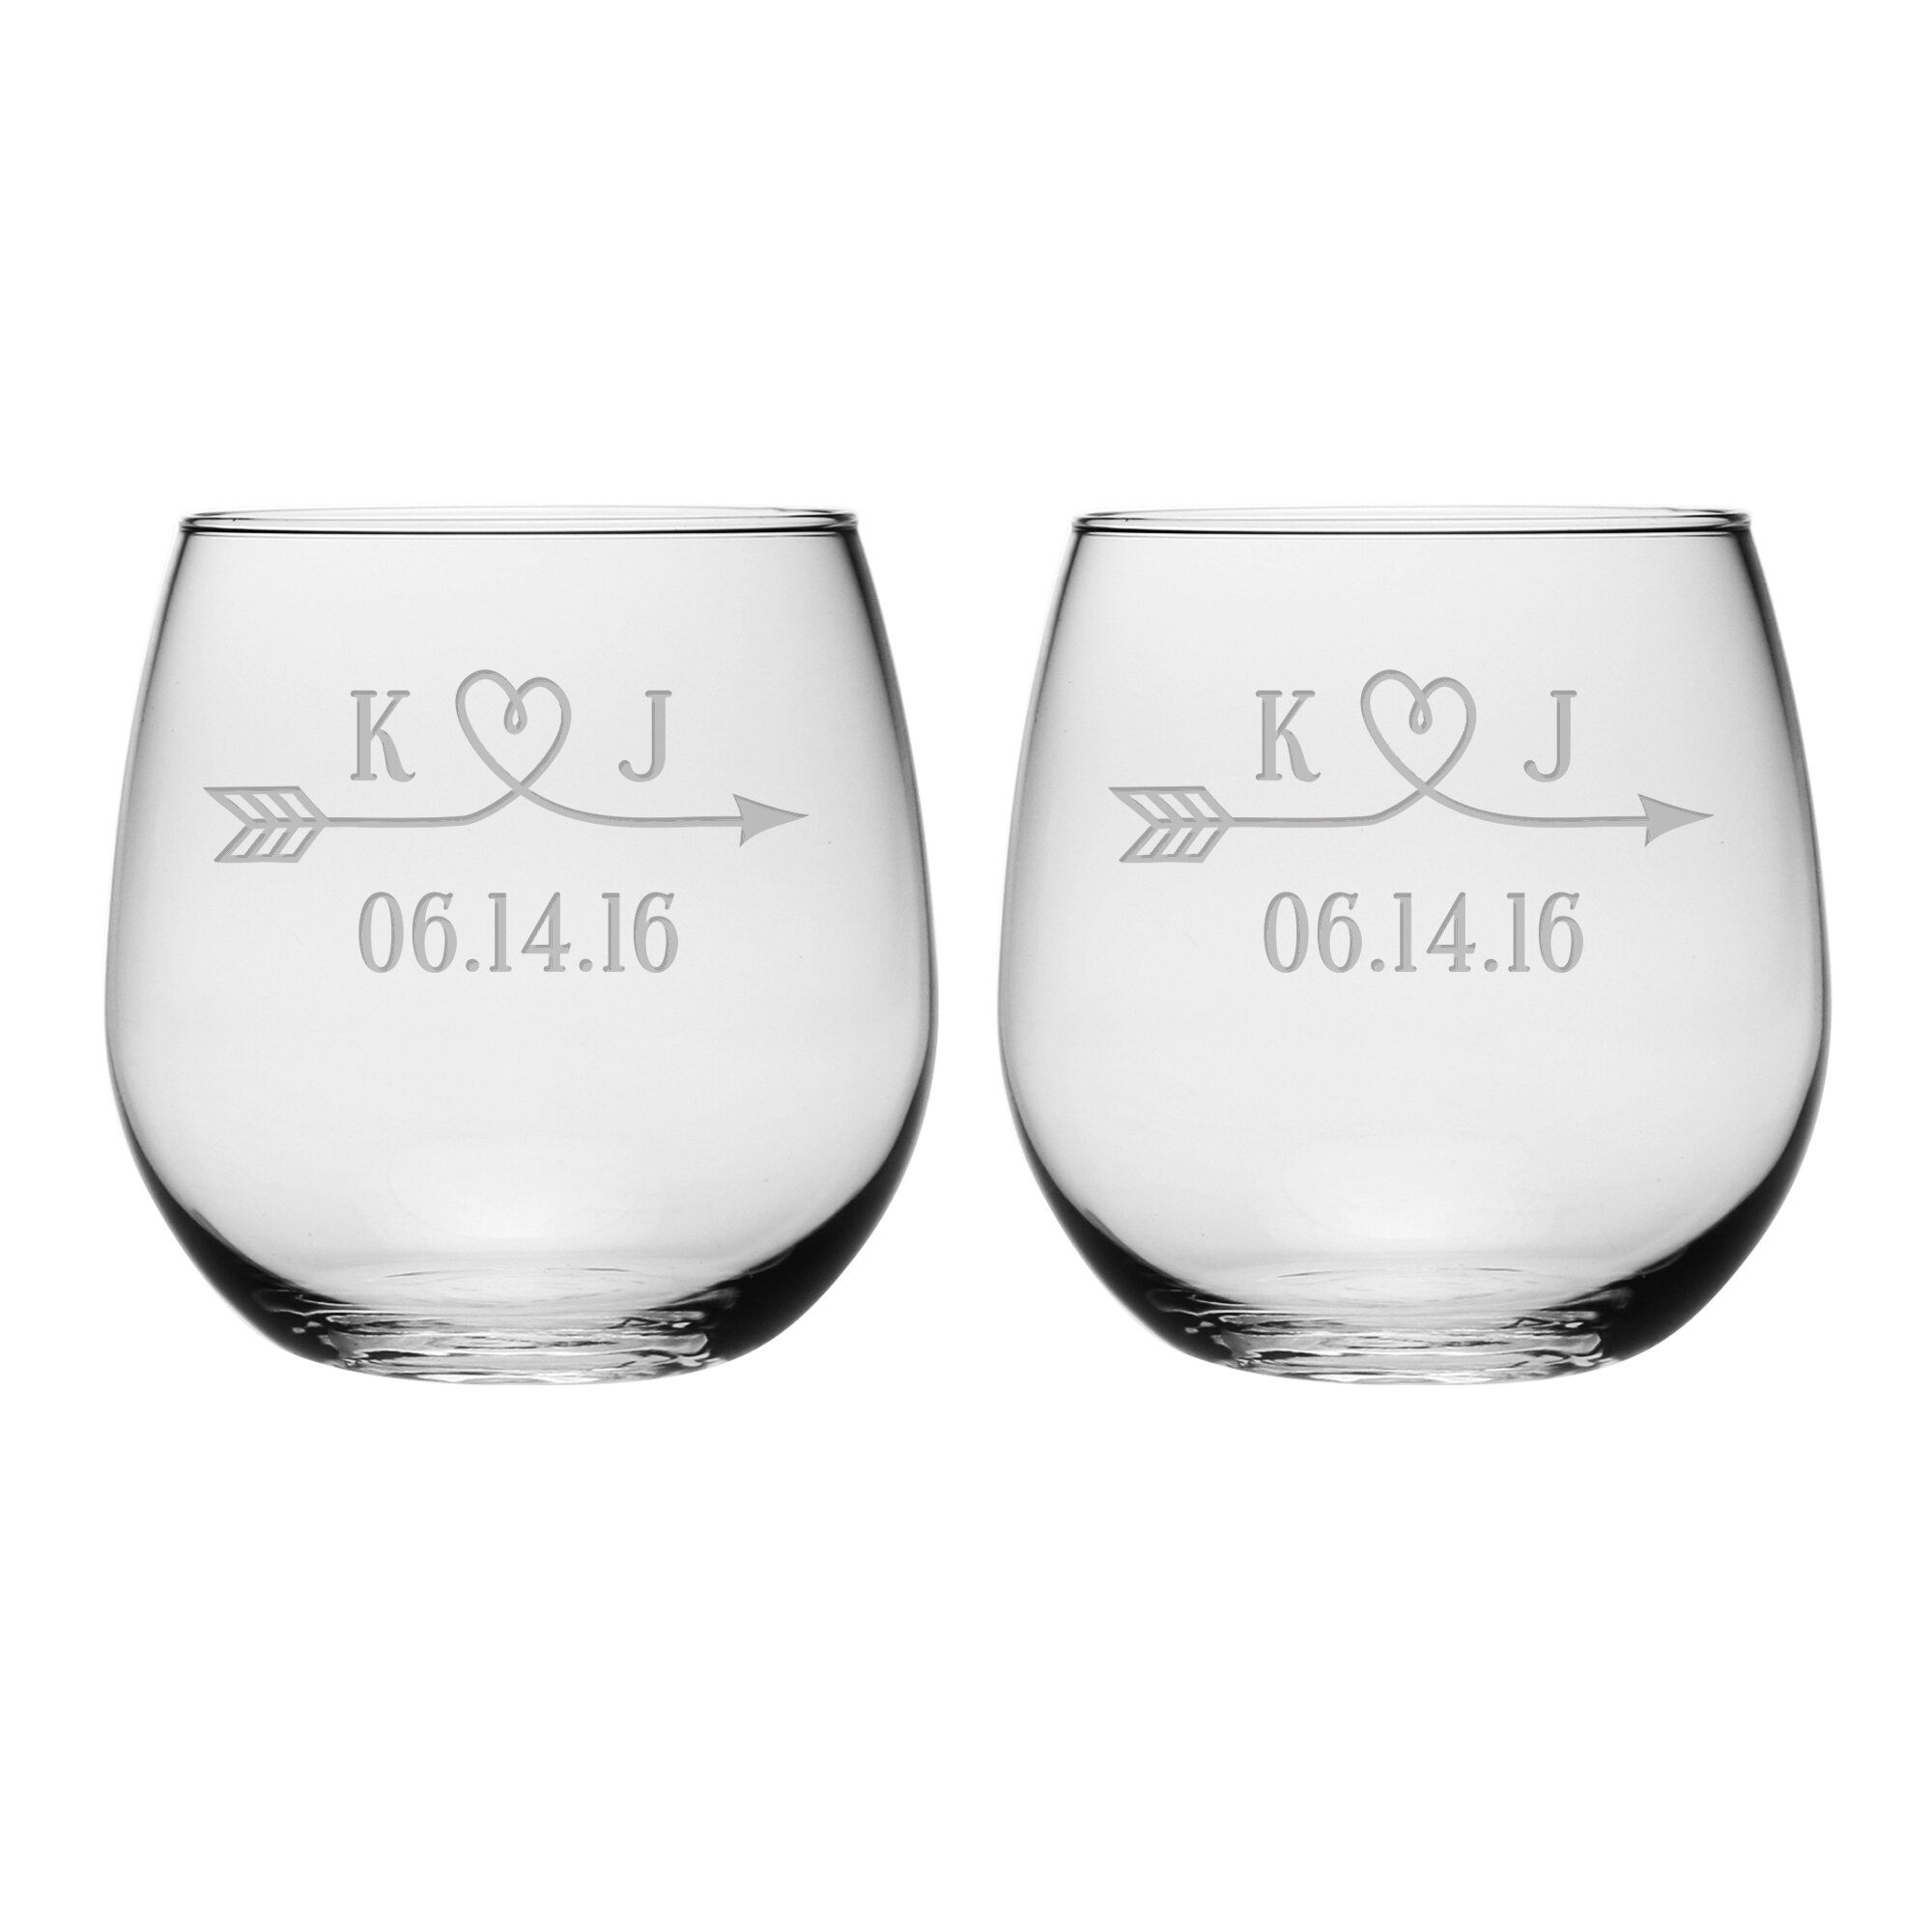 Personalized etched wine glass set of two, Stemmed wine glasses